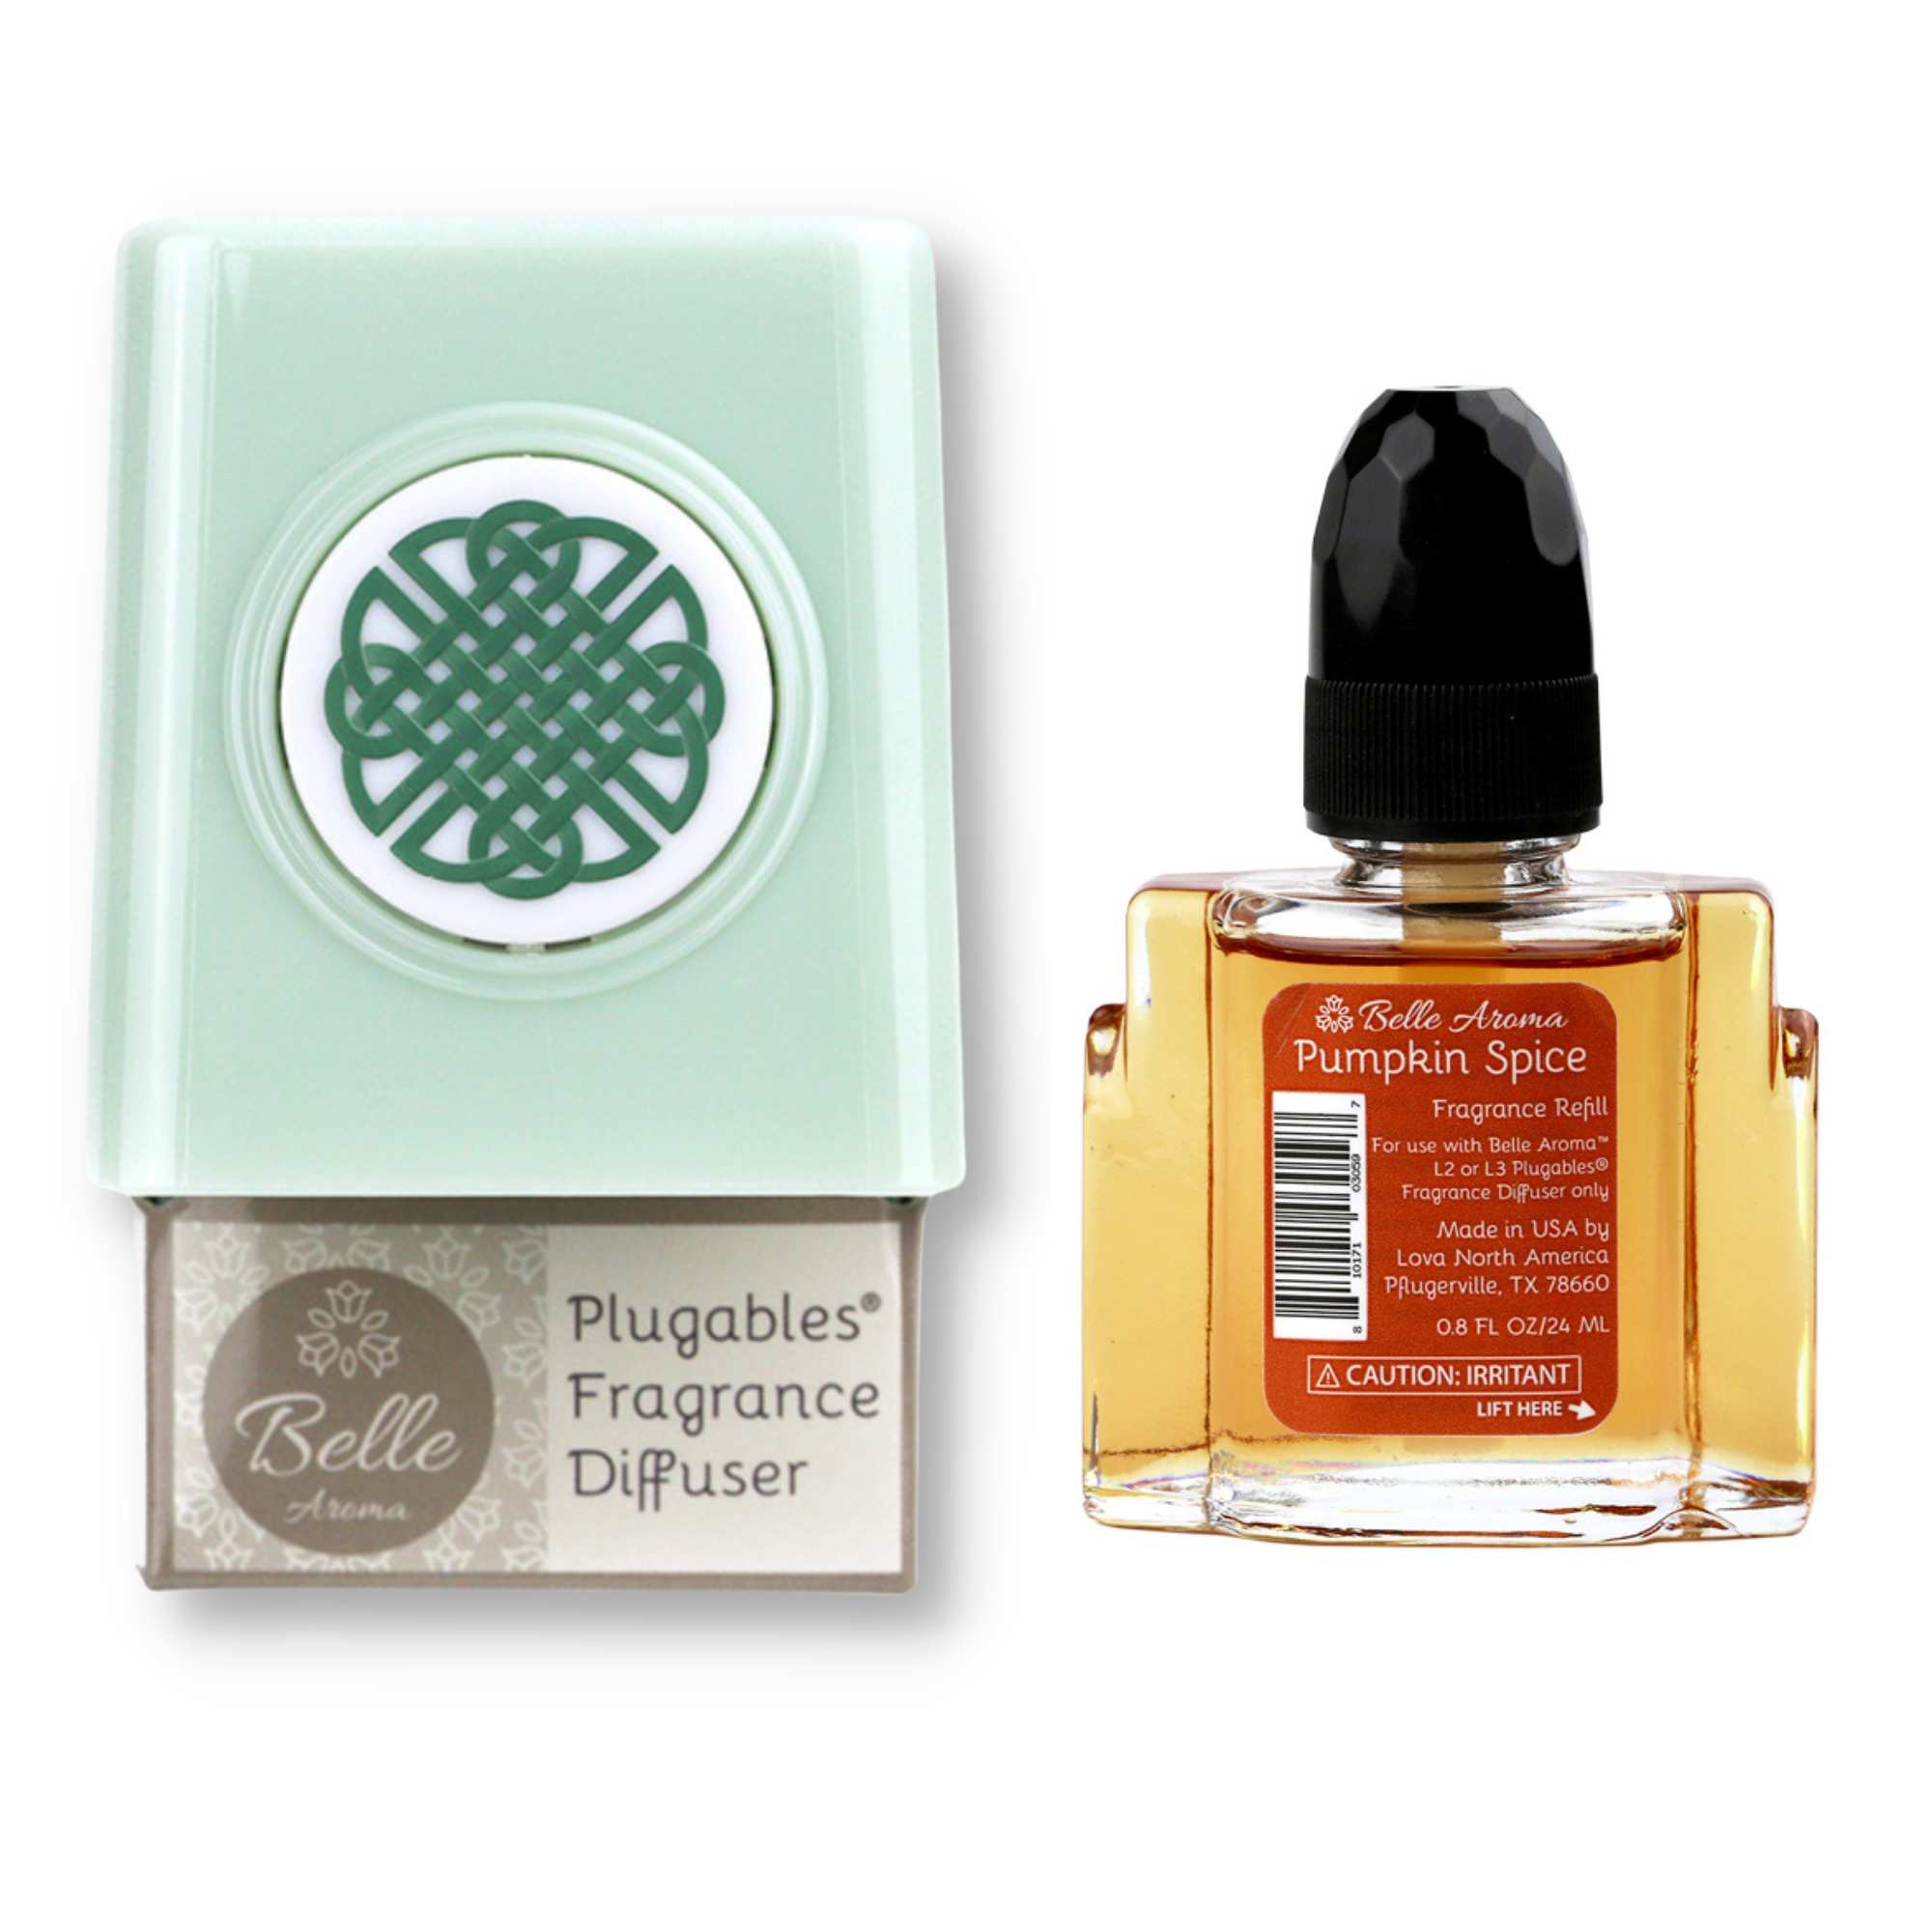 Celtic Knot Medallion Plugables® Plugin Electric Scented Oil Diffuser - Sea Glass with Pumpkin Spice Fragrance Oil Home Fragrance Accessories